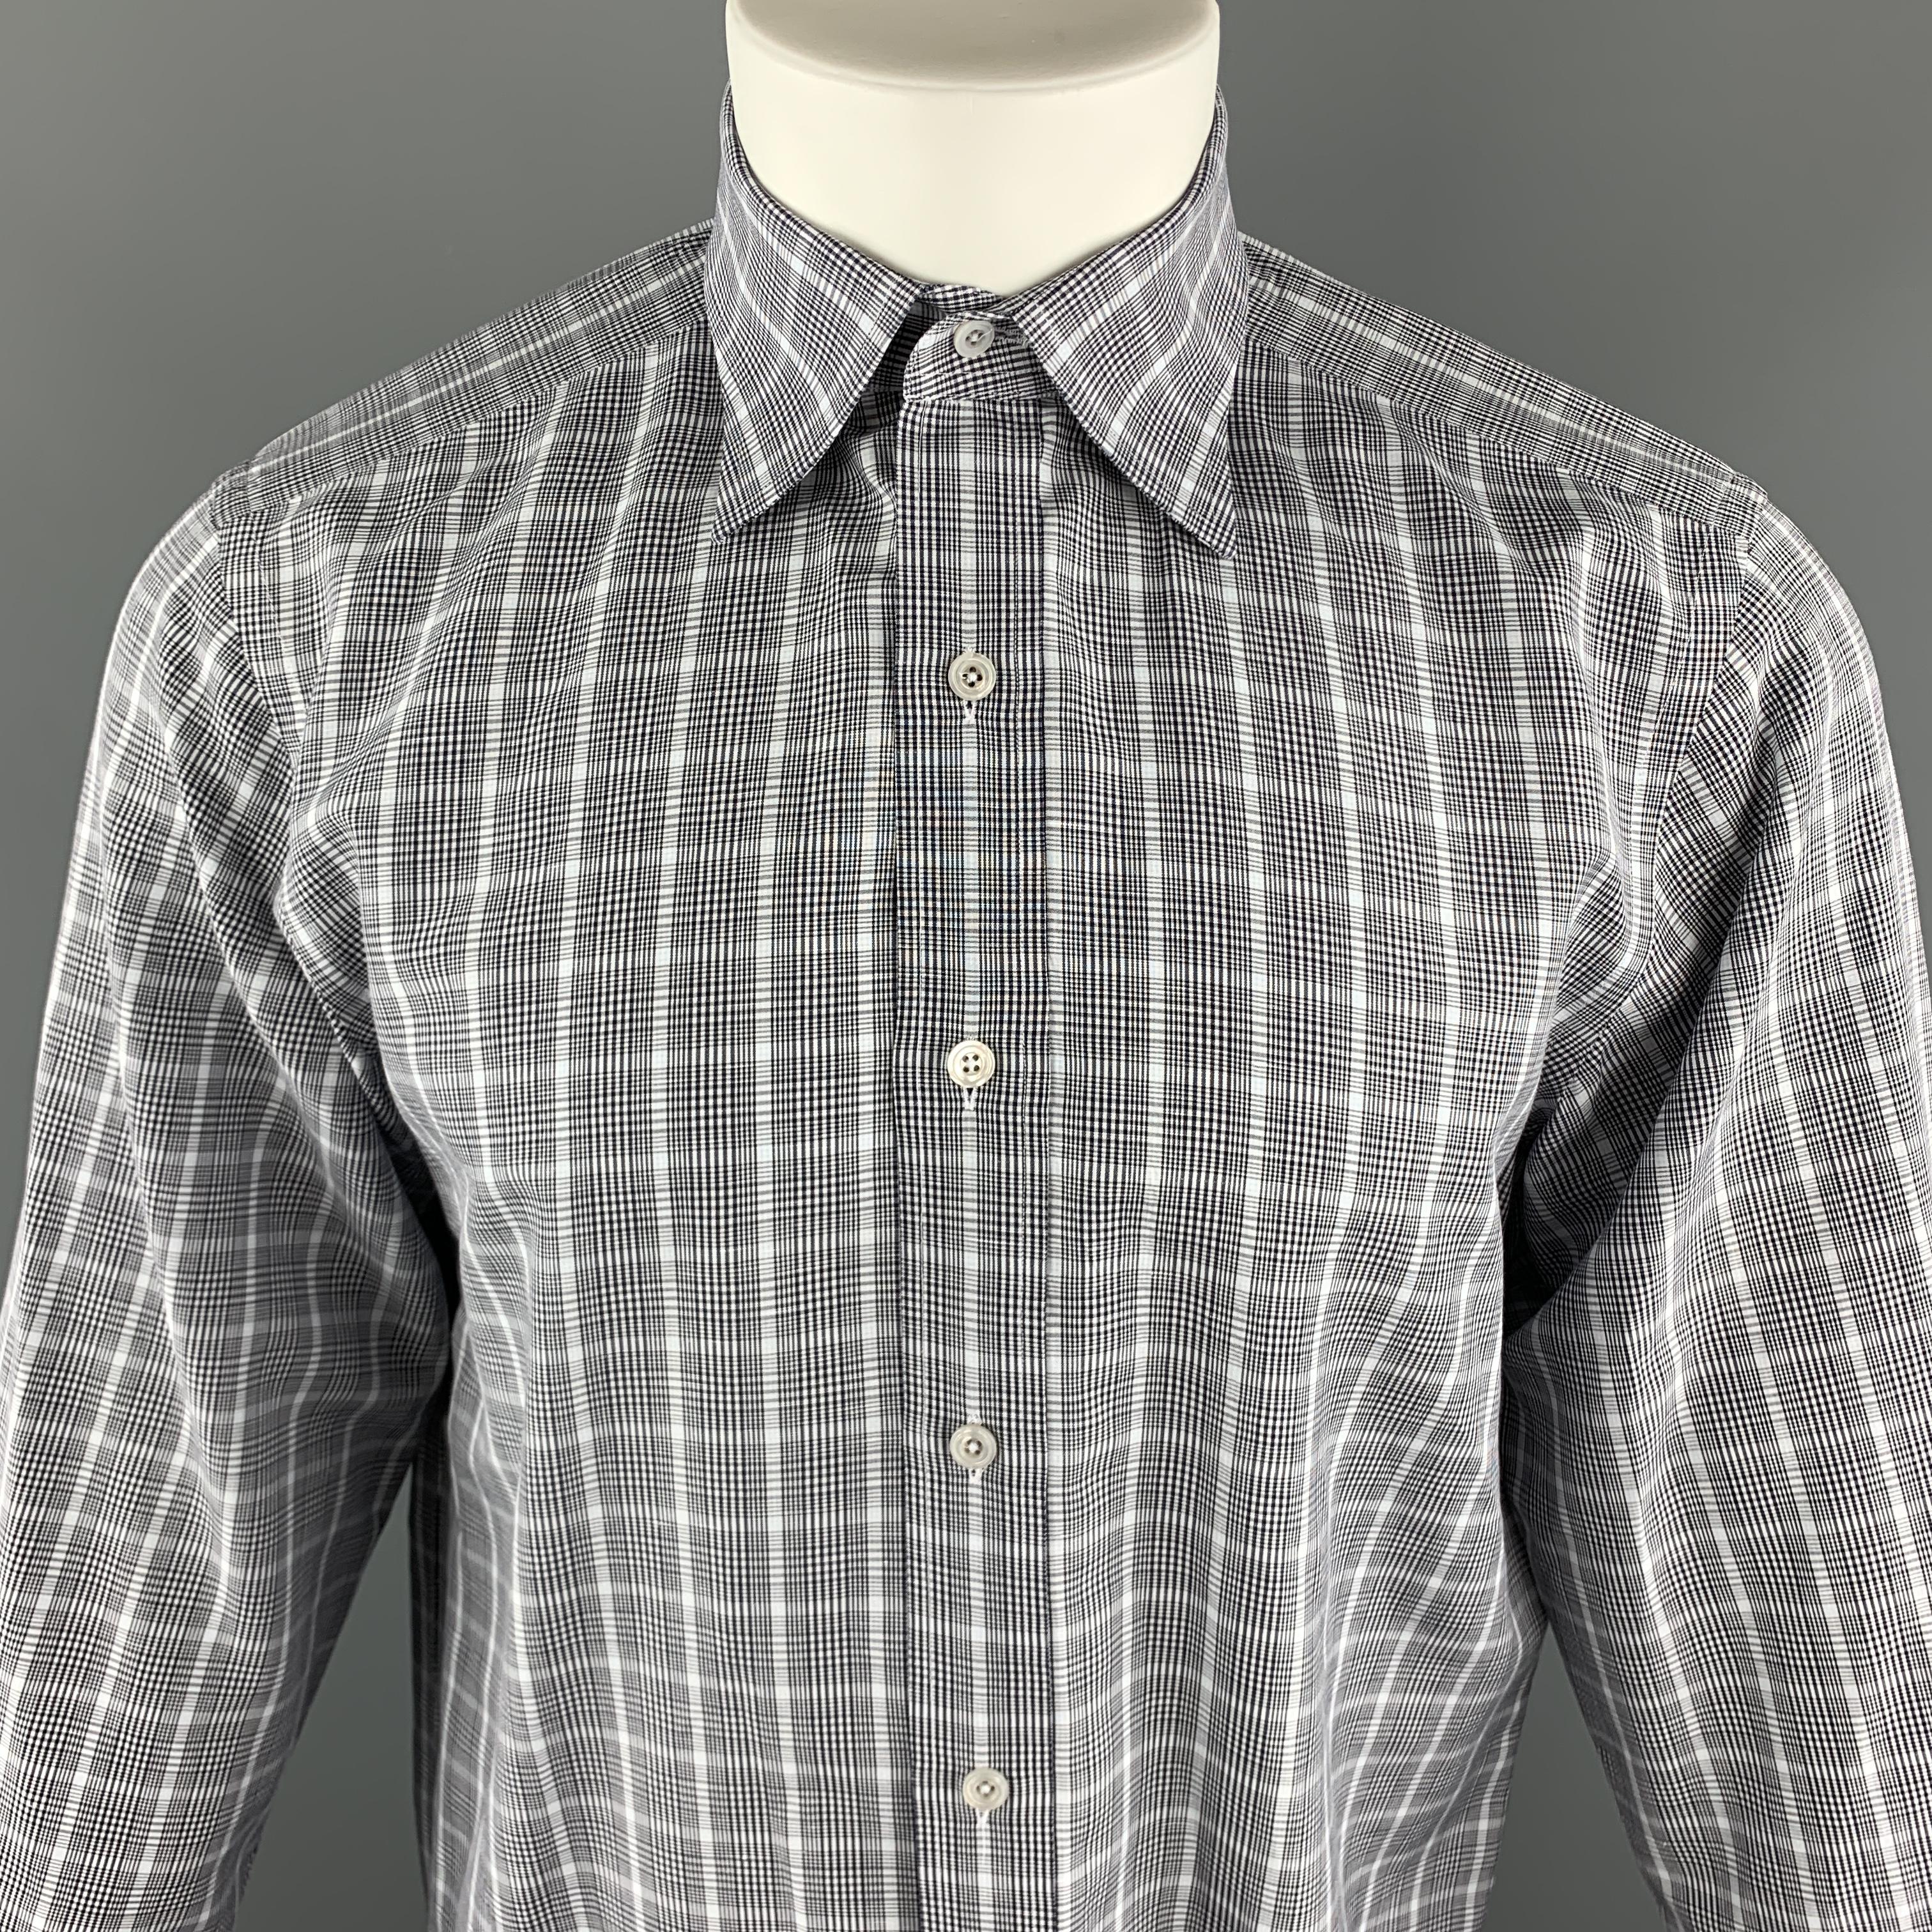 TOM FORD Long Sleeve Shirt comes in blue and grey plaid cotton material, with a pointed collar, double buttoned cuffs, button up. Made in Italy. 

Excellent Good Pre-Owned Condition.
Marked: 40 15 3/4

Measurements:

Shoulder: 17.5 in.
Chest: 42